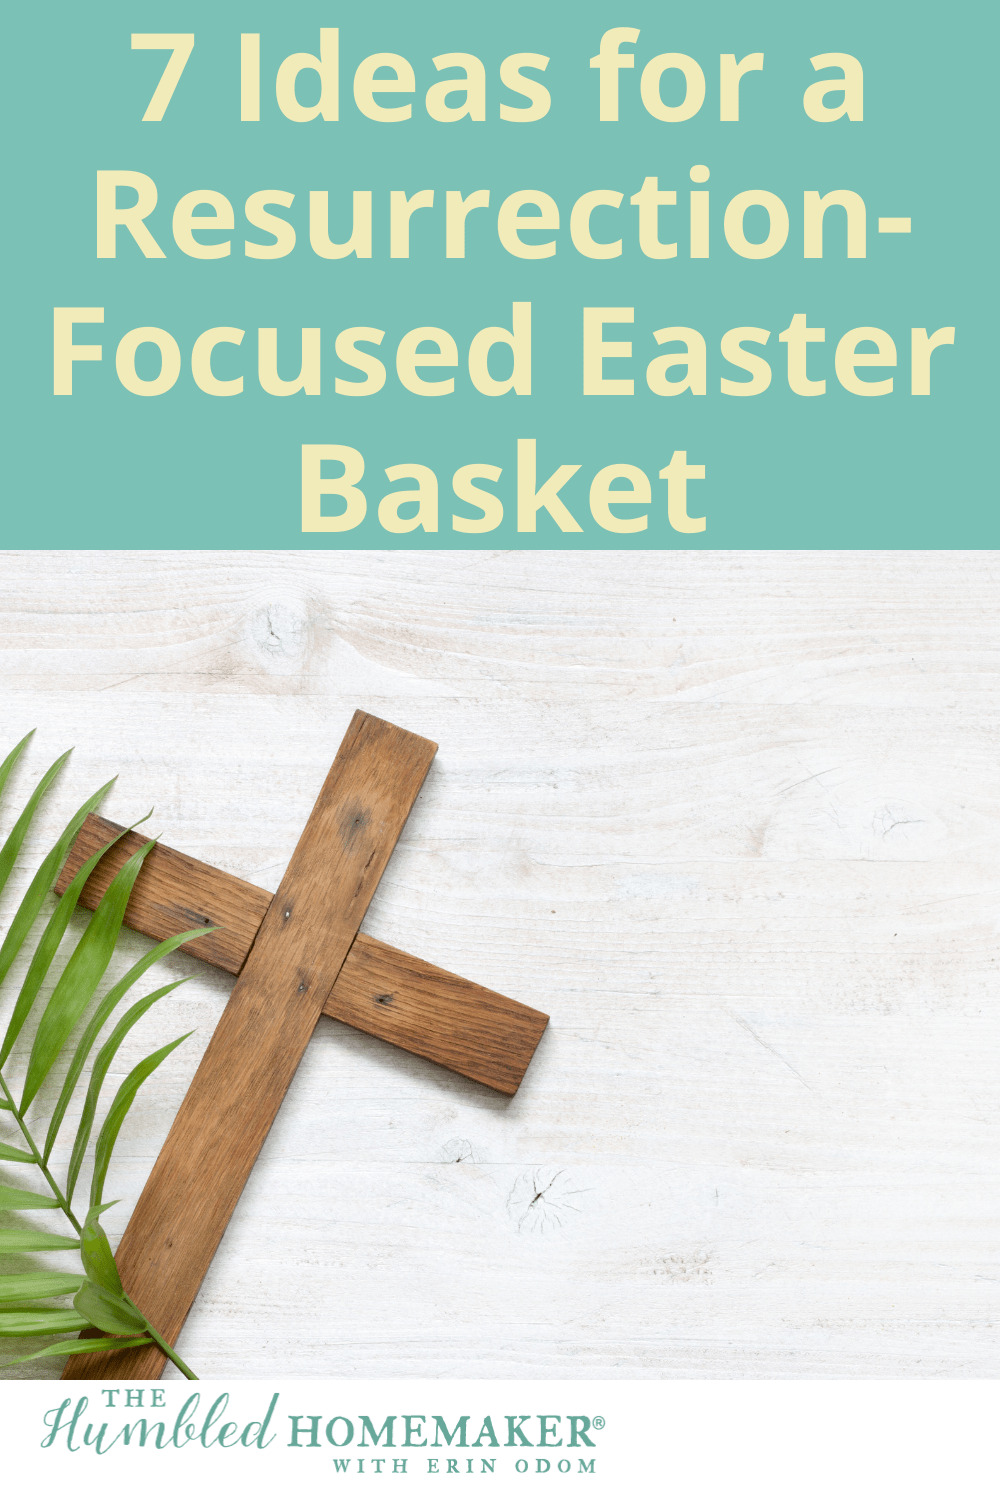 Want to help your children learn what the Easter holiday is really about? Here are 7 ideas for a Resurrection-focused Easter basket that will point them to Christ.